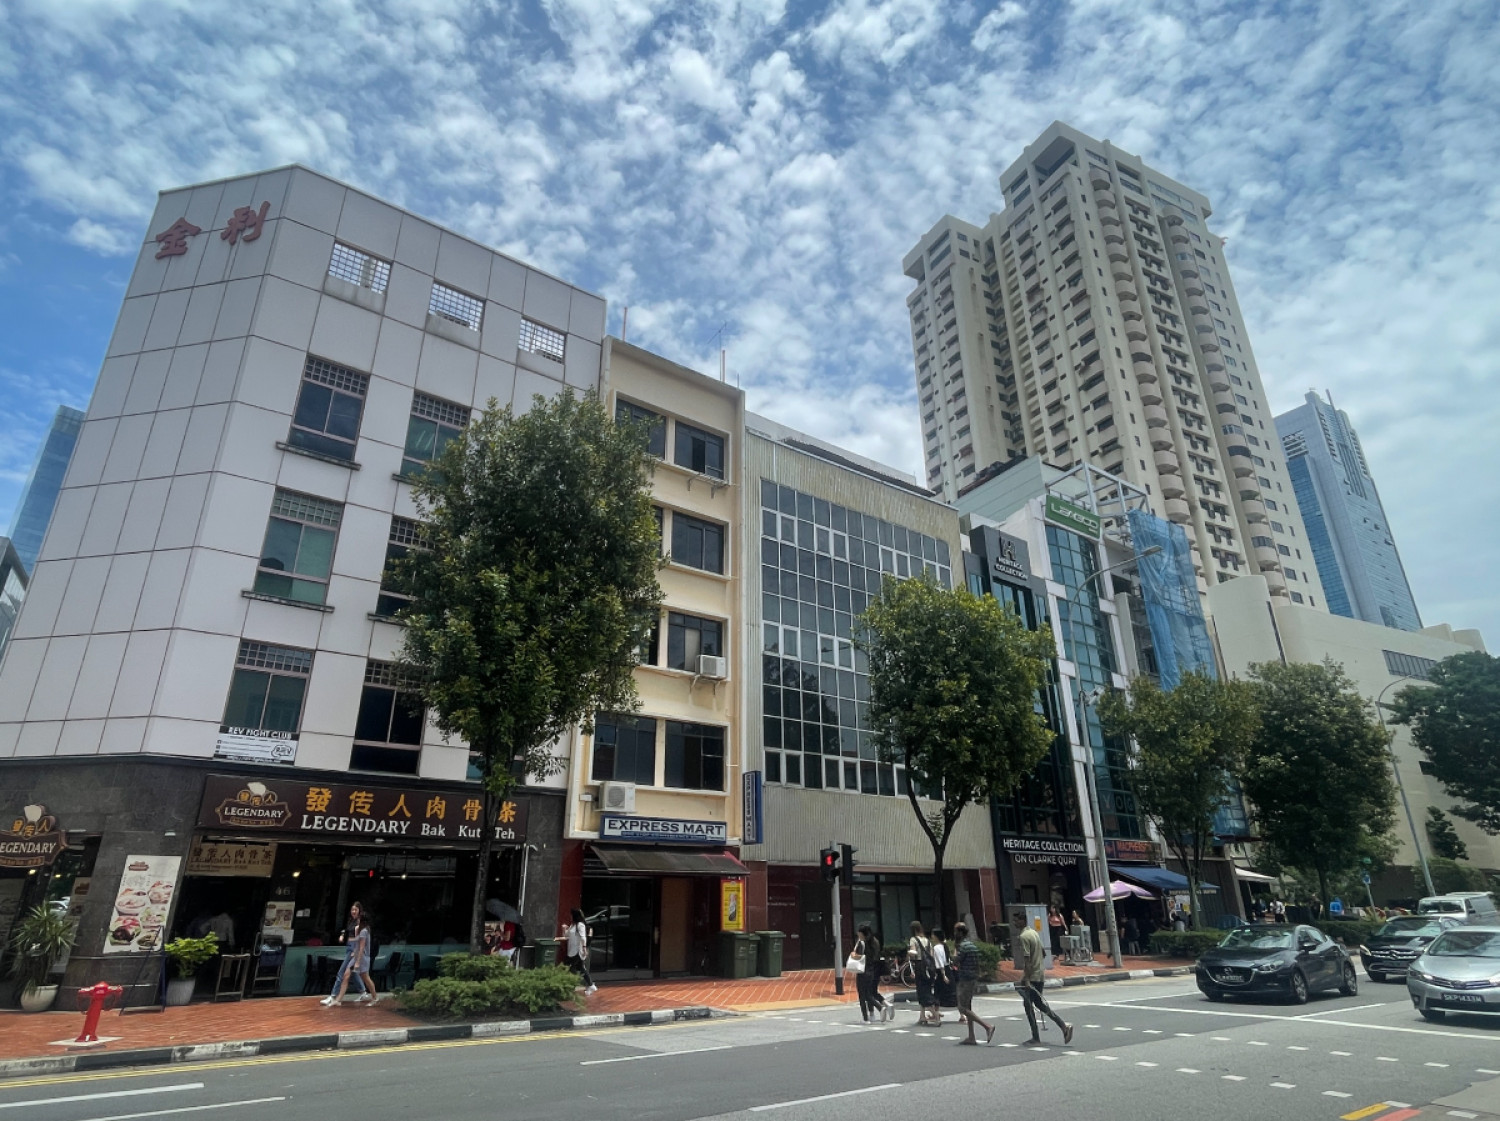 [UPDATE] Building at South Bridge Road sold for $13.58 mil - Property News